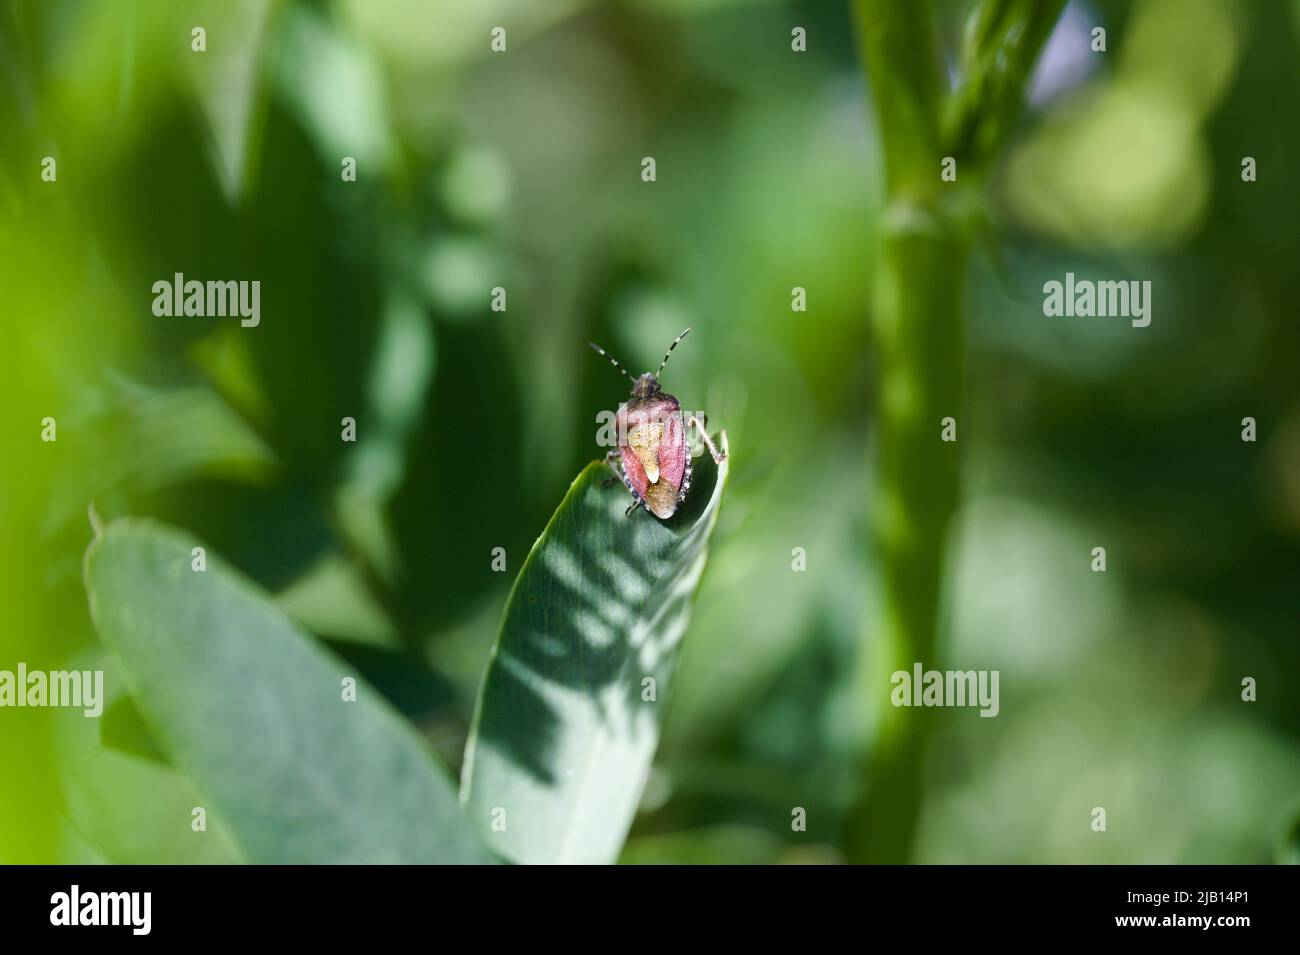 Small Worlds - View of a Hairy Shield Bug/ Sloe Bug on the peak of plant foliage , Dolycoris baccarum Stock Photo